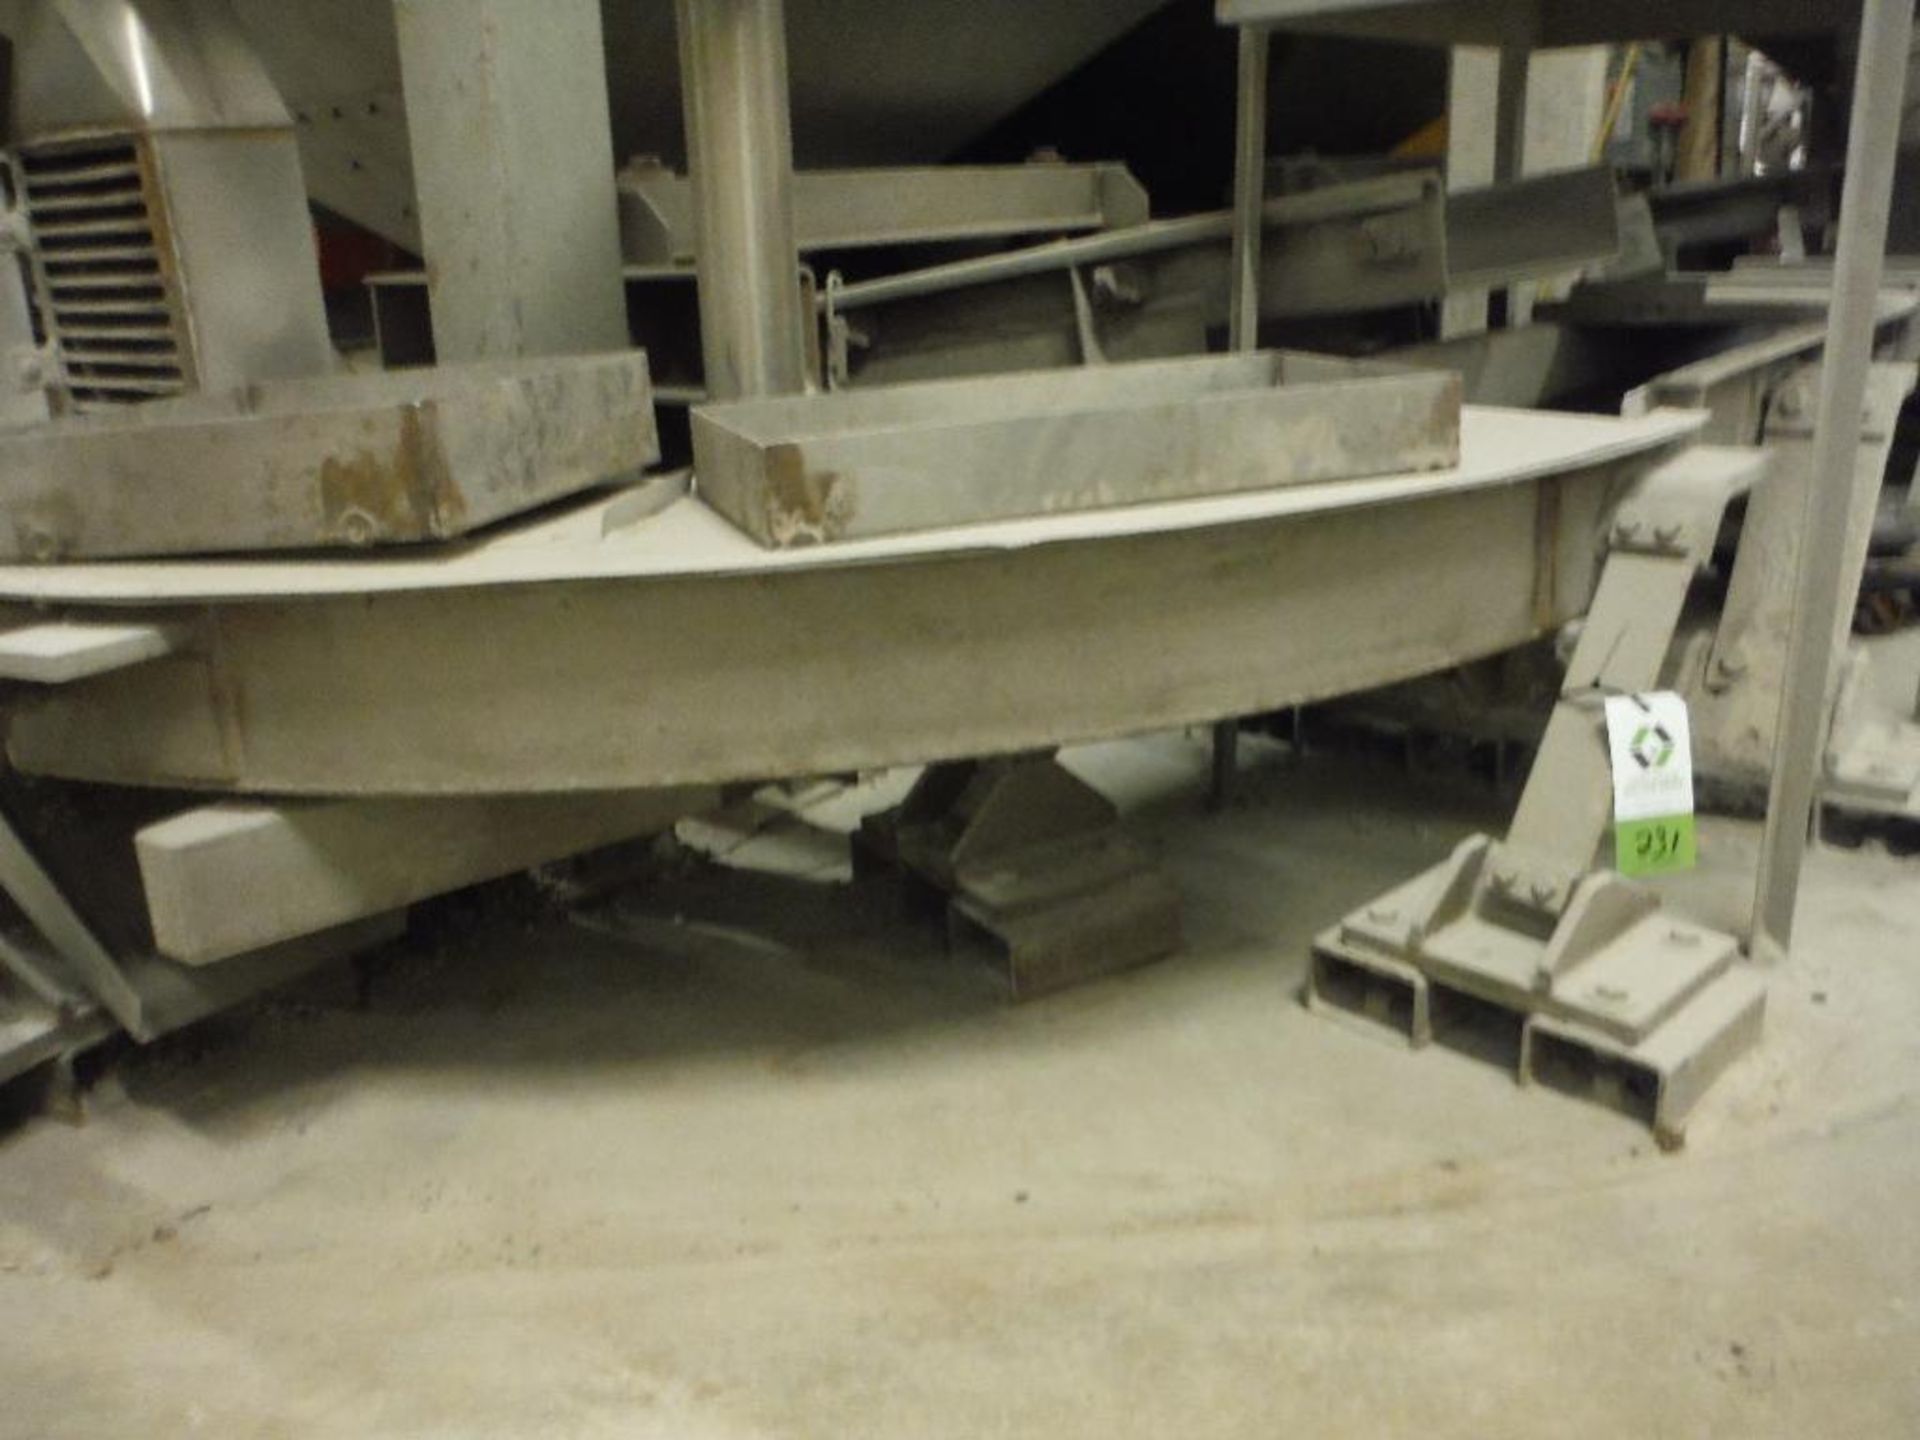 General Kinematics Corporation vibratory conveyor, 13 ft. x 12 in., w/ a 90 degree turn. Rigging Fee